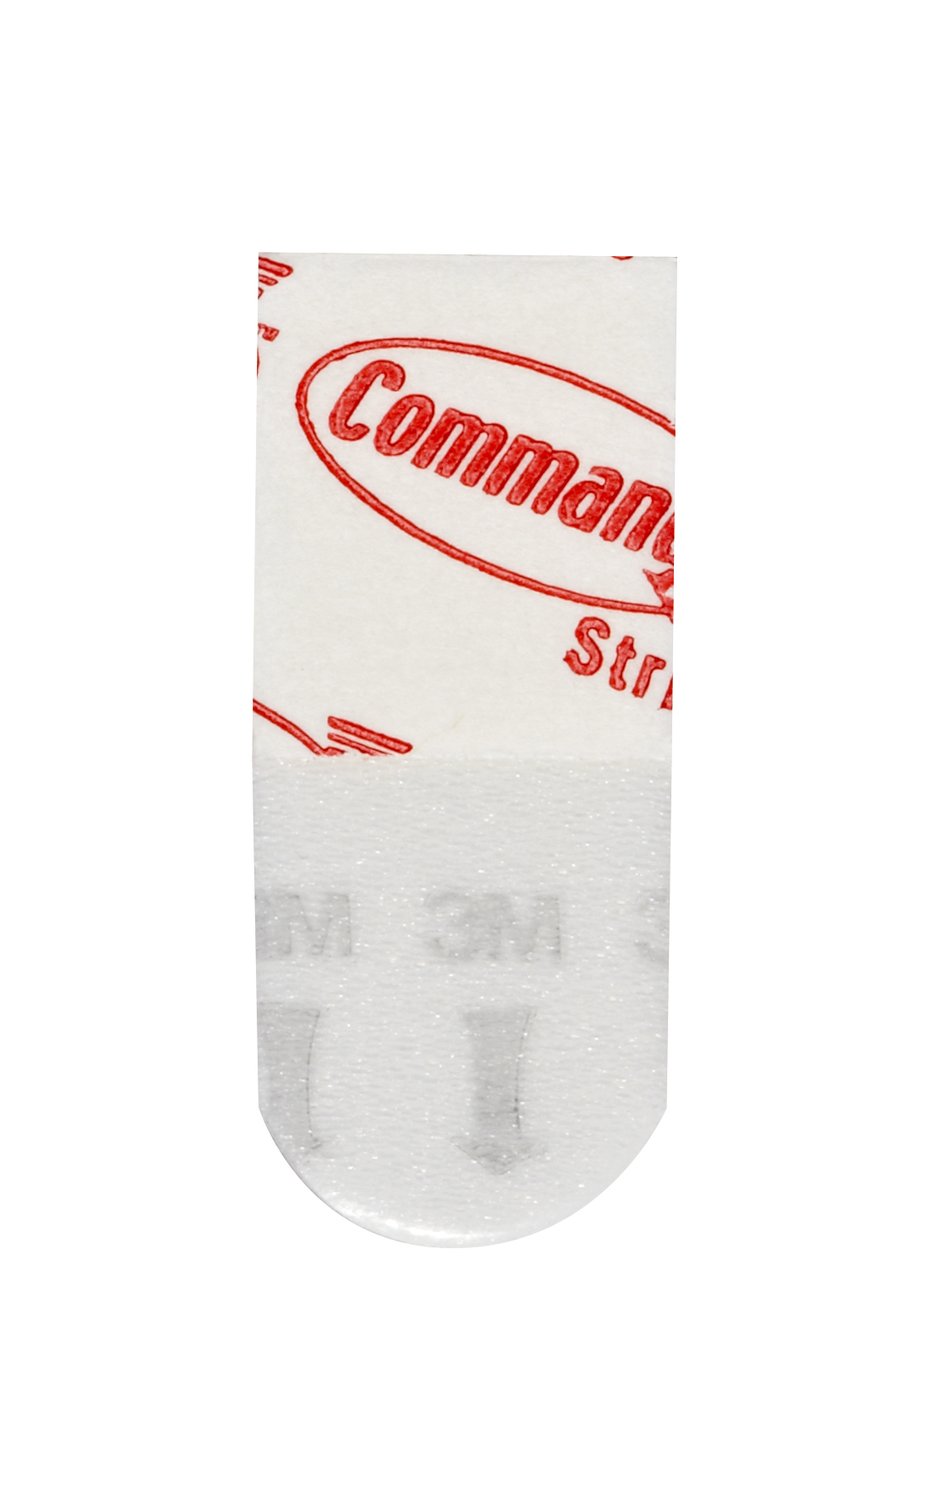 Command Adhesive Strips